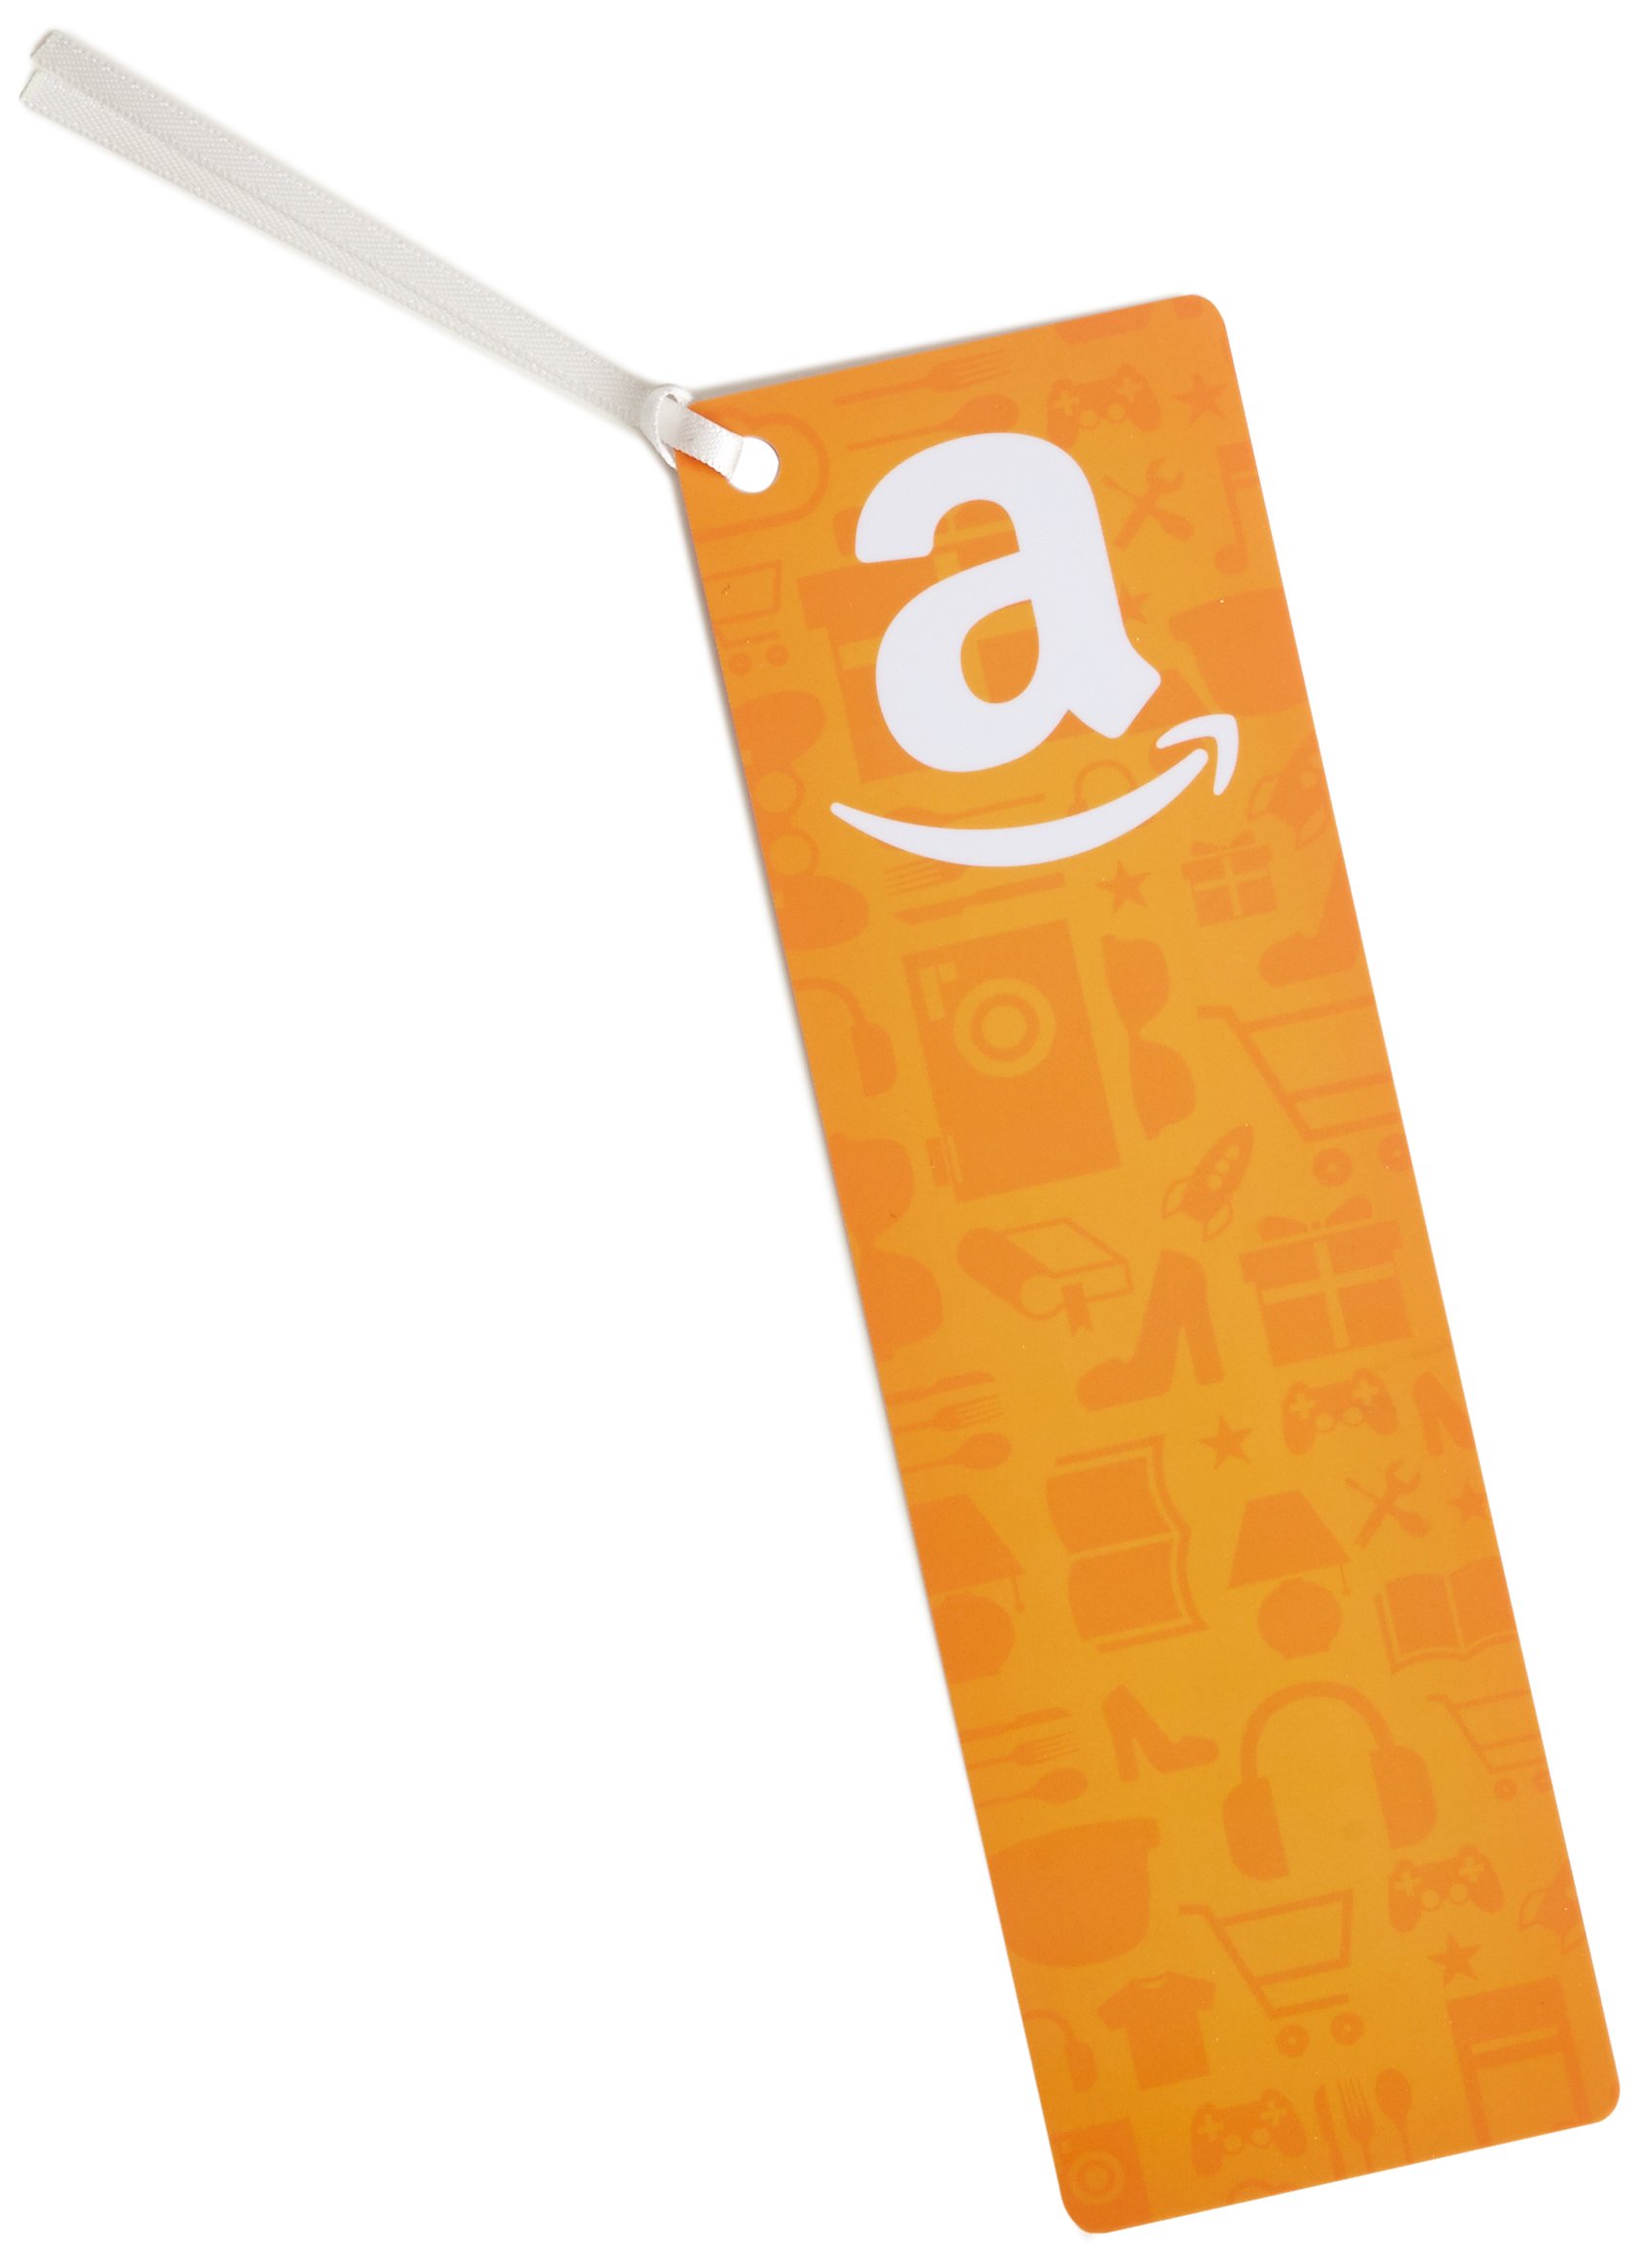 Book Cover Amazon.com Gift Cards - As a Bookmark